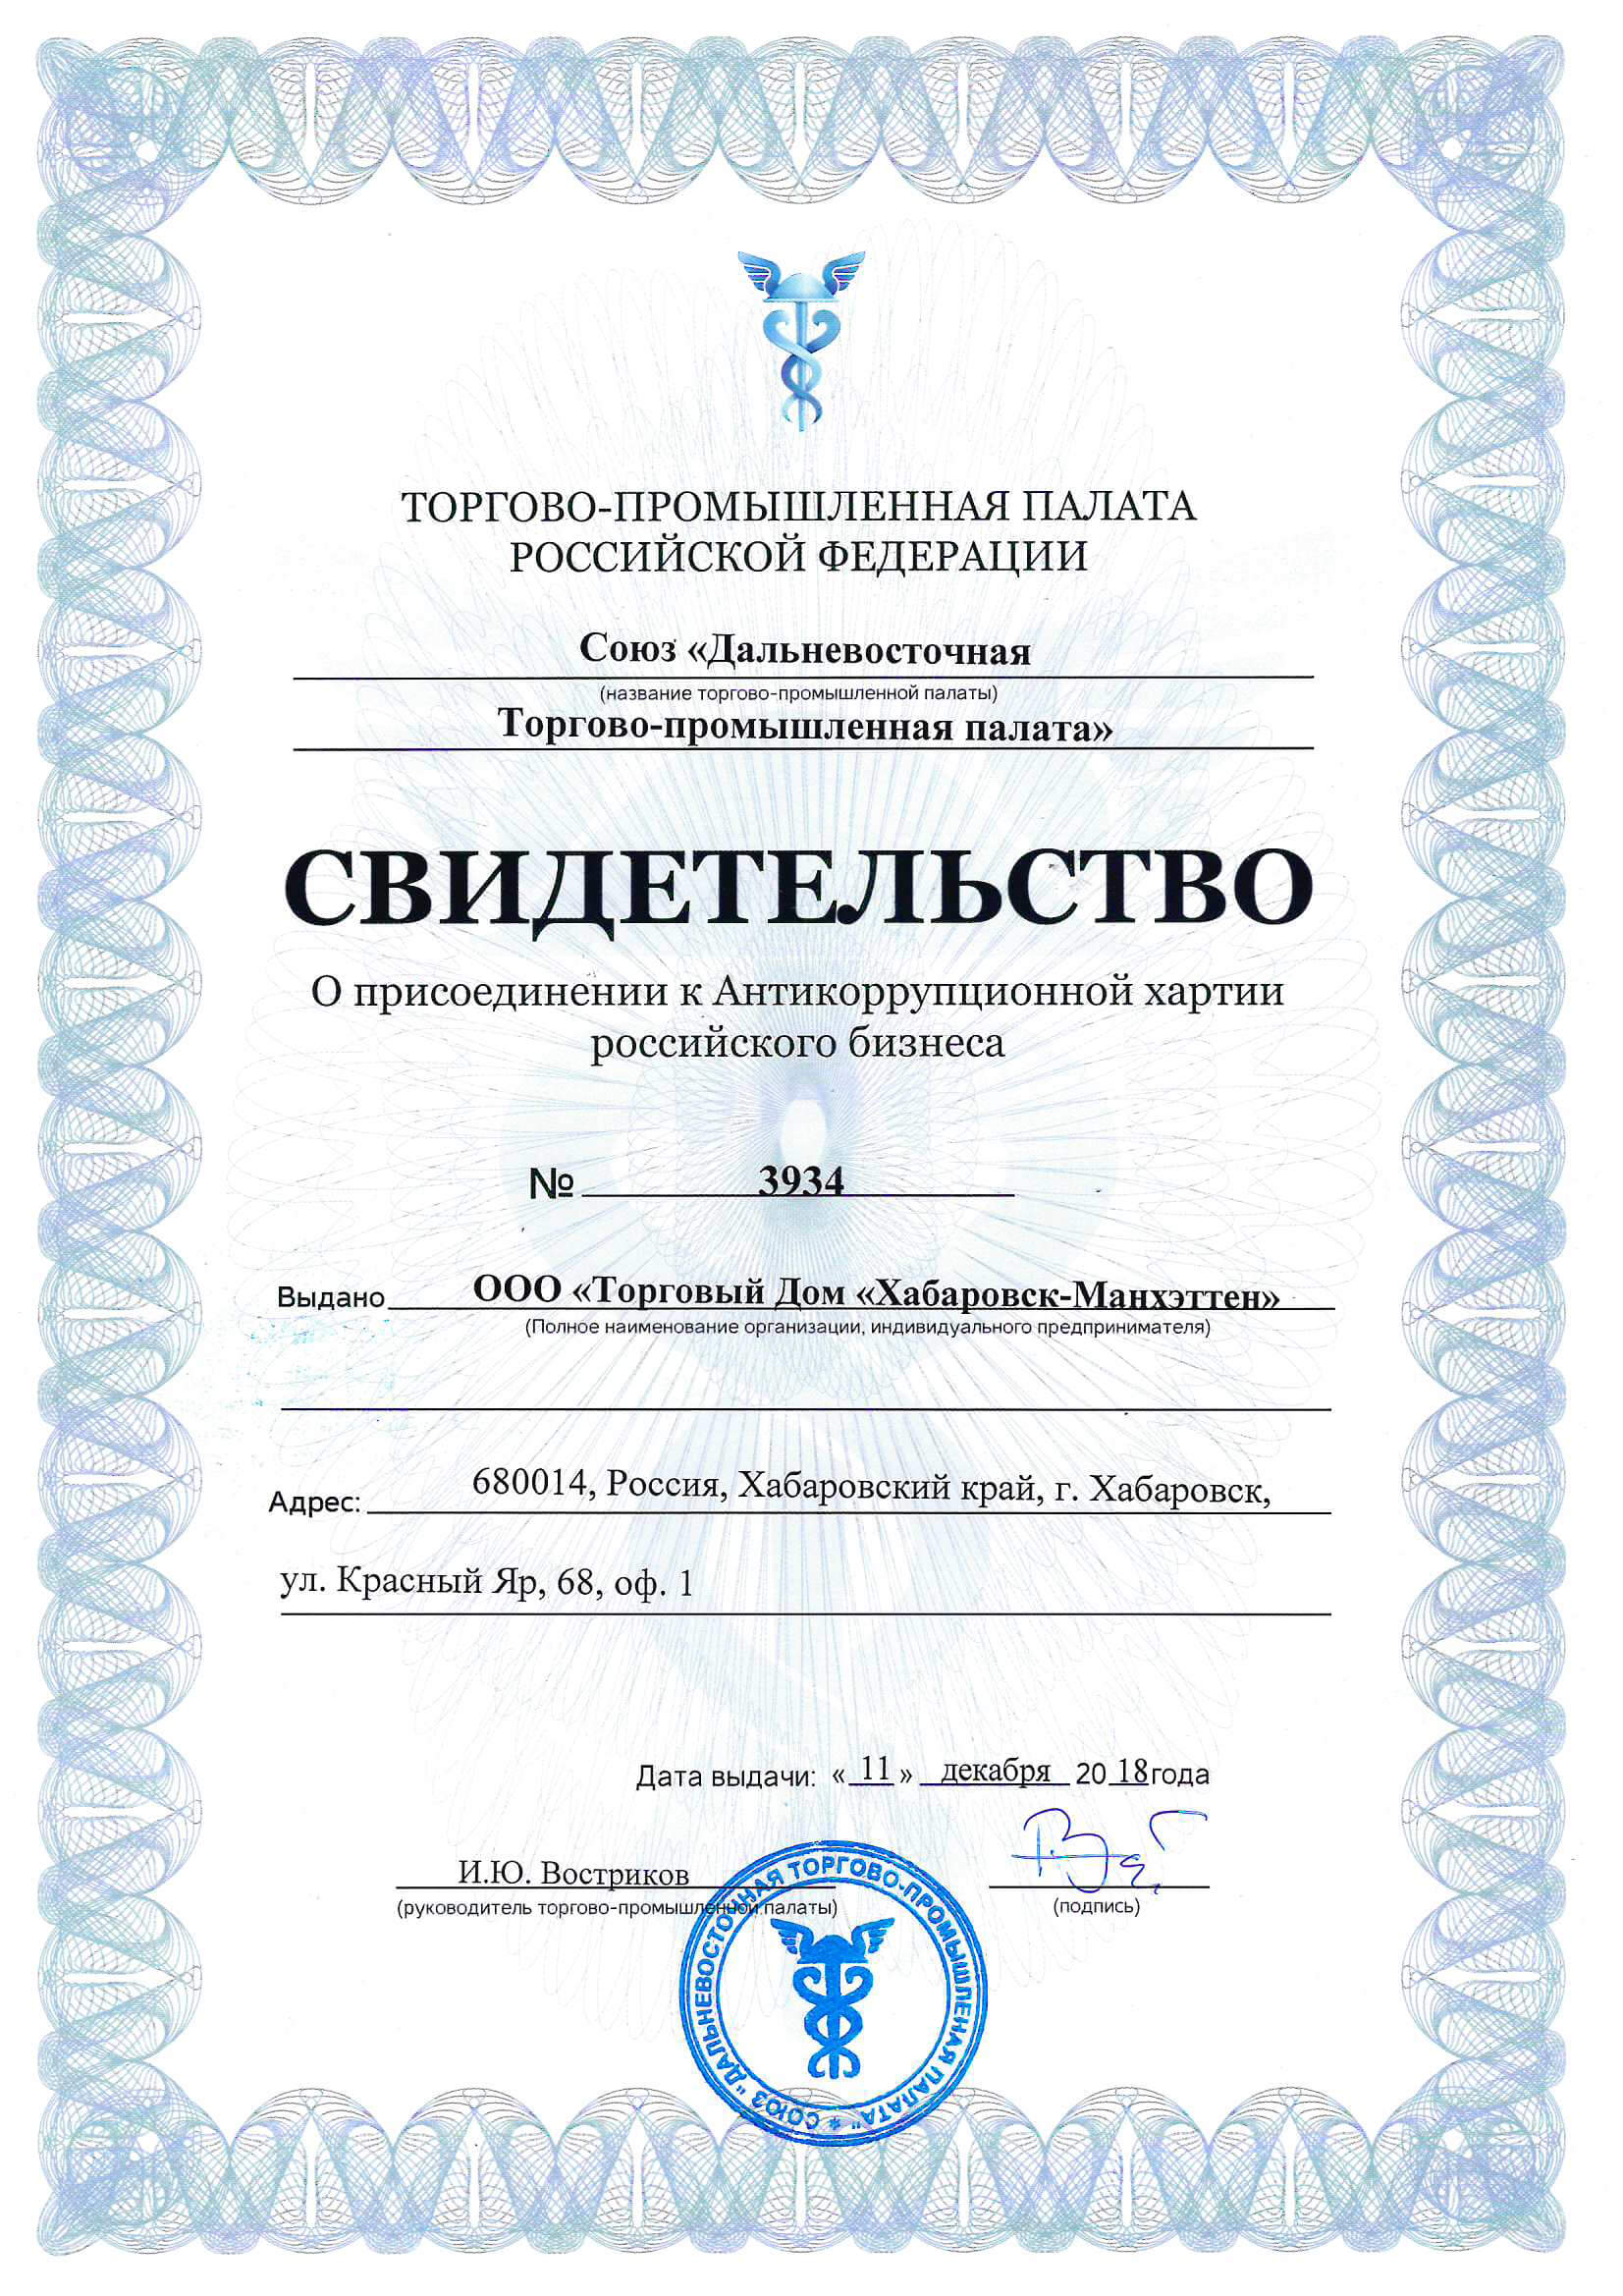 Certificate of accession to the Anti-Corruption Charter of Russian Business